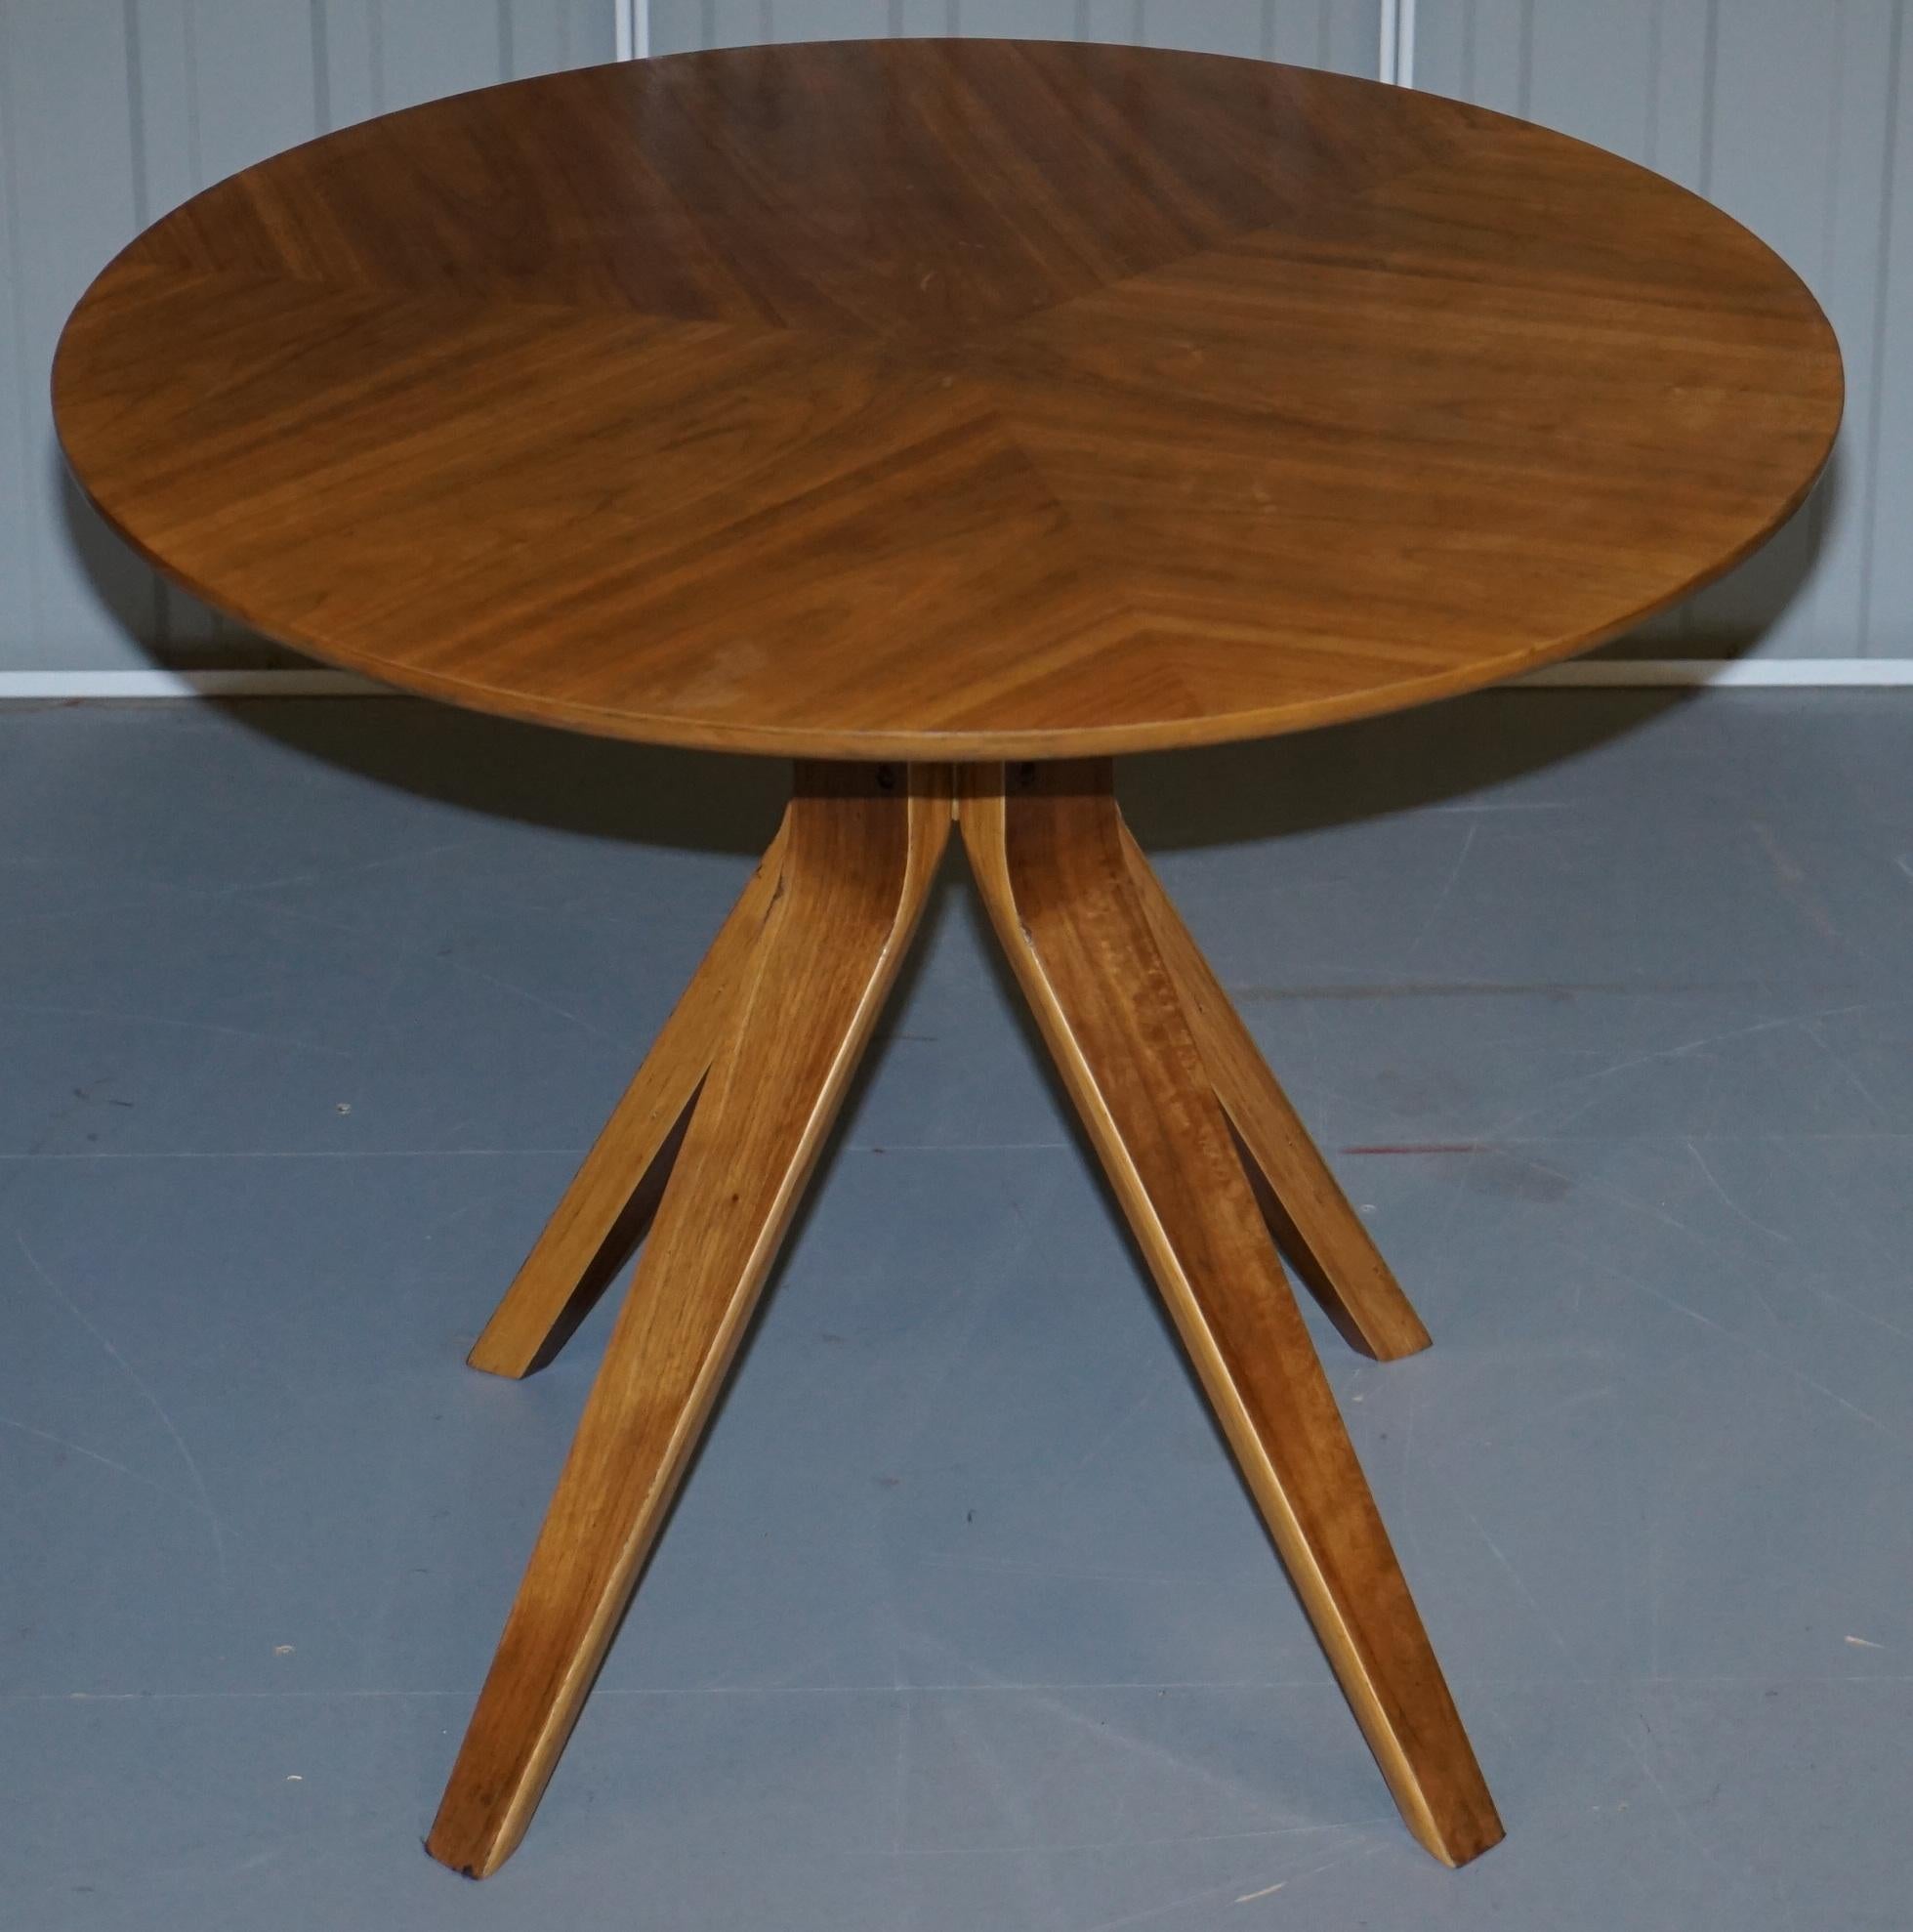 We are delighted to offer for sale this stunning Mid-Century Modern bent plywood dining table and chair set

A very good looking and well made set, I’ve seen similar Fritz Hansen pieces but never with this cool base

We have cleaned waxed and